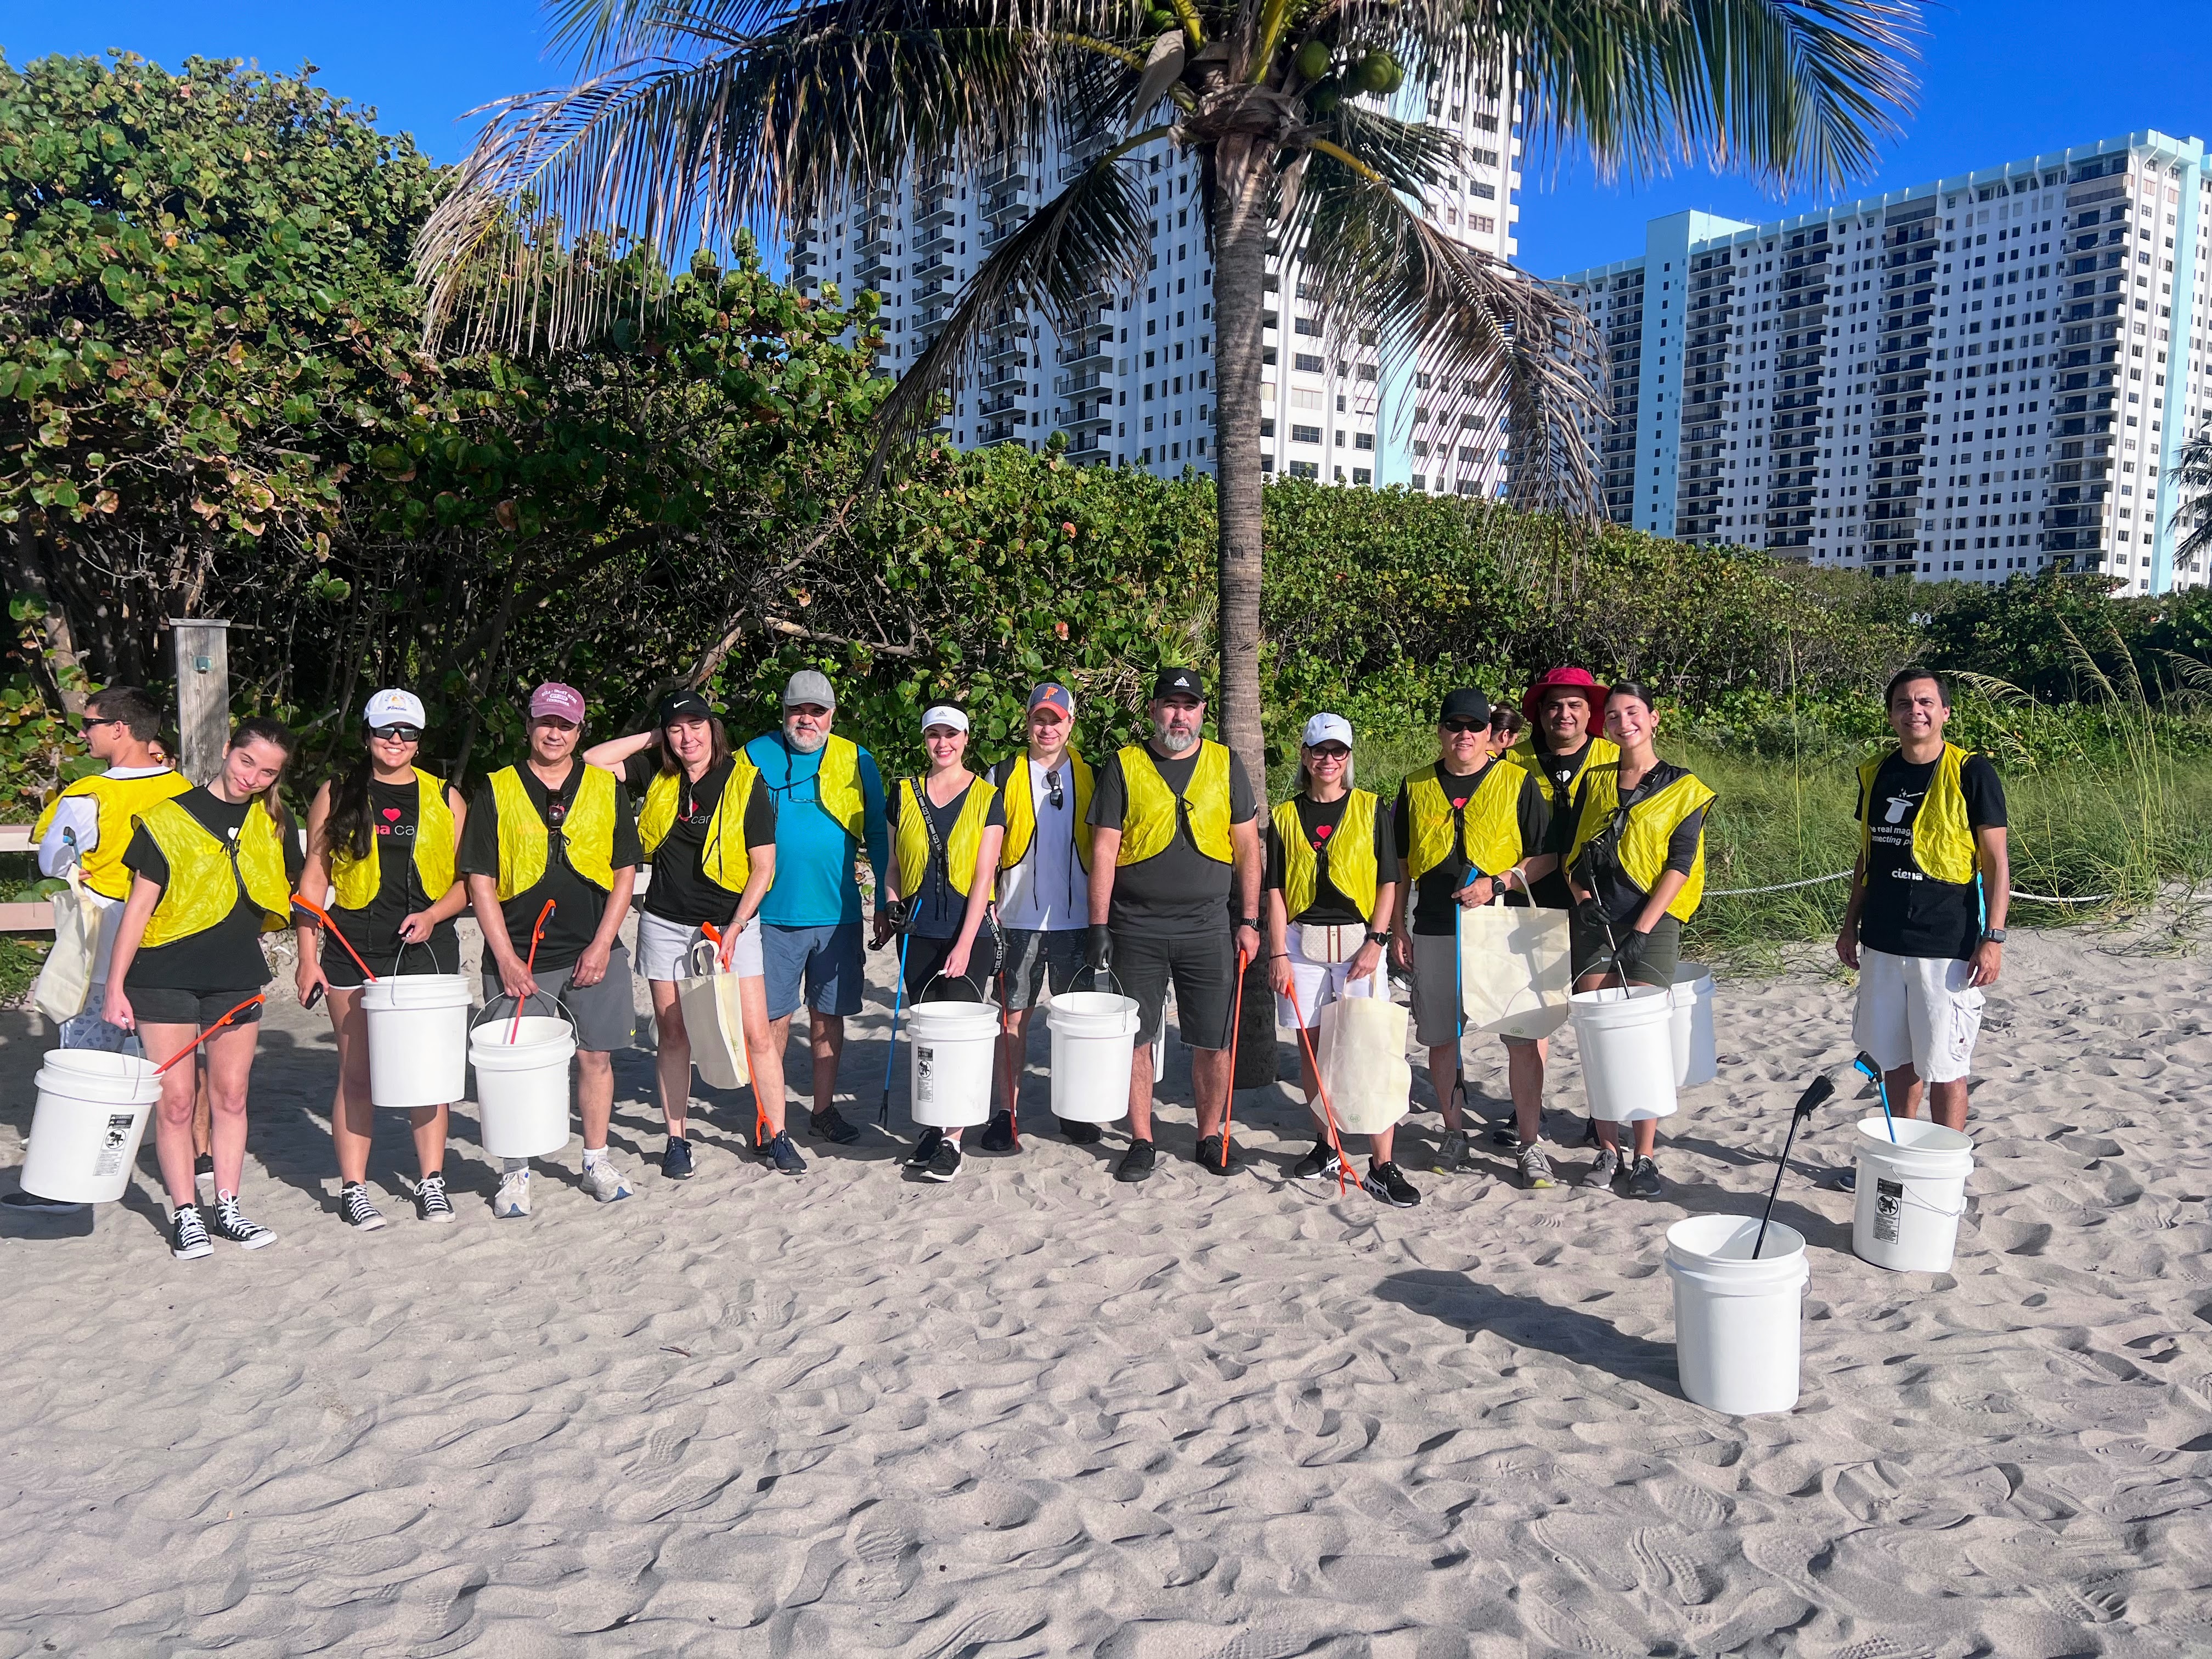 Men and women in cleanup gear on a beach